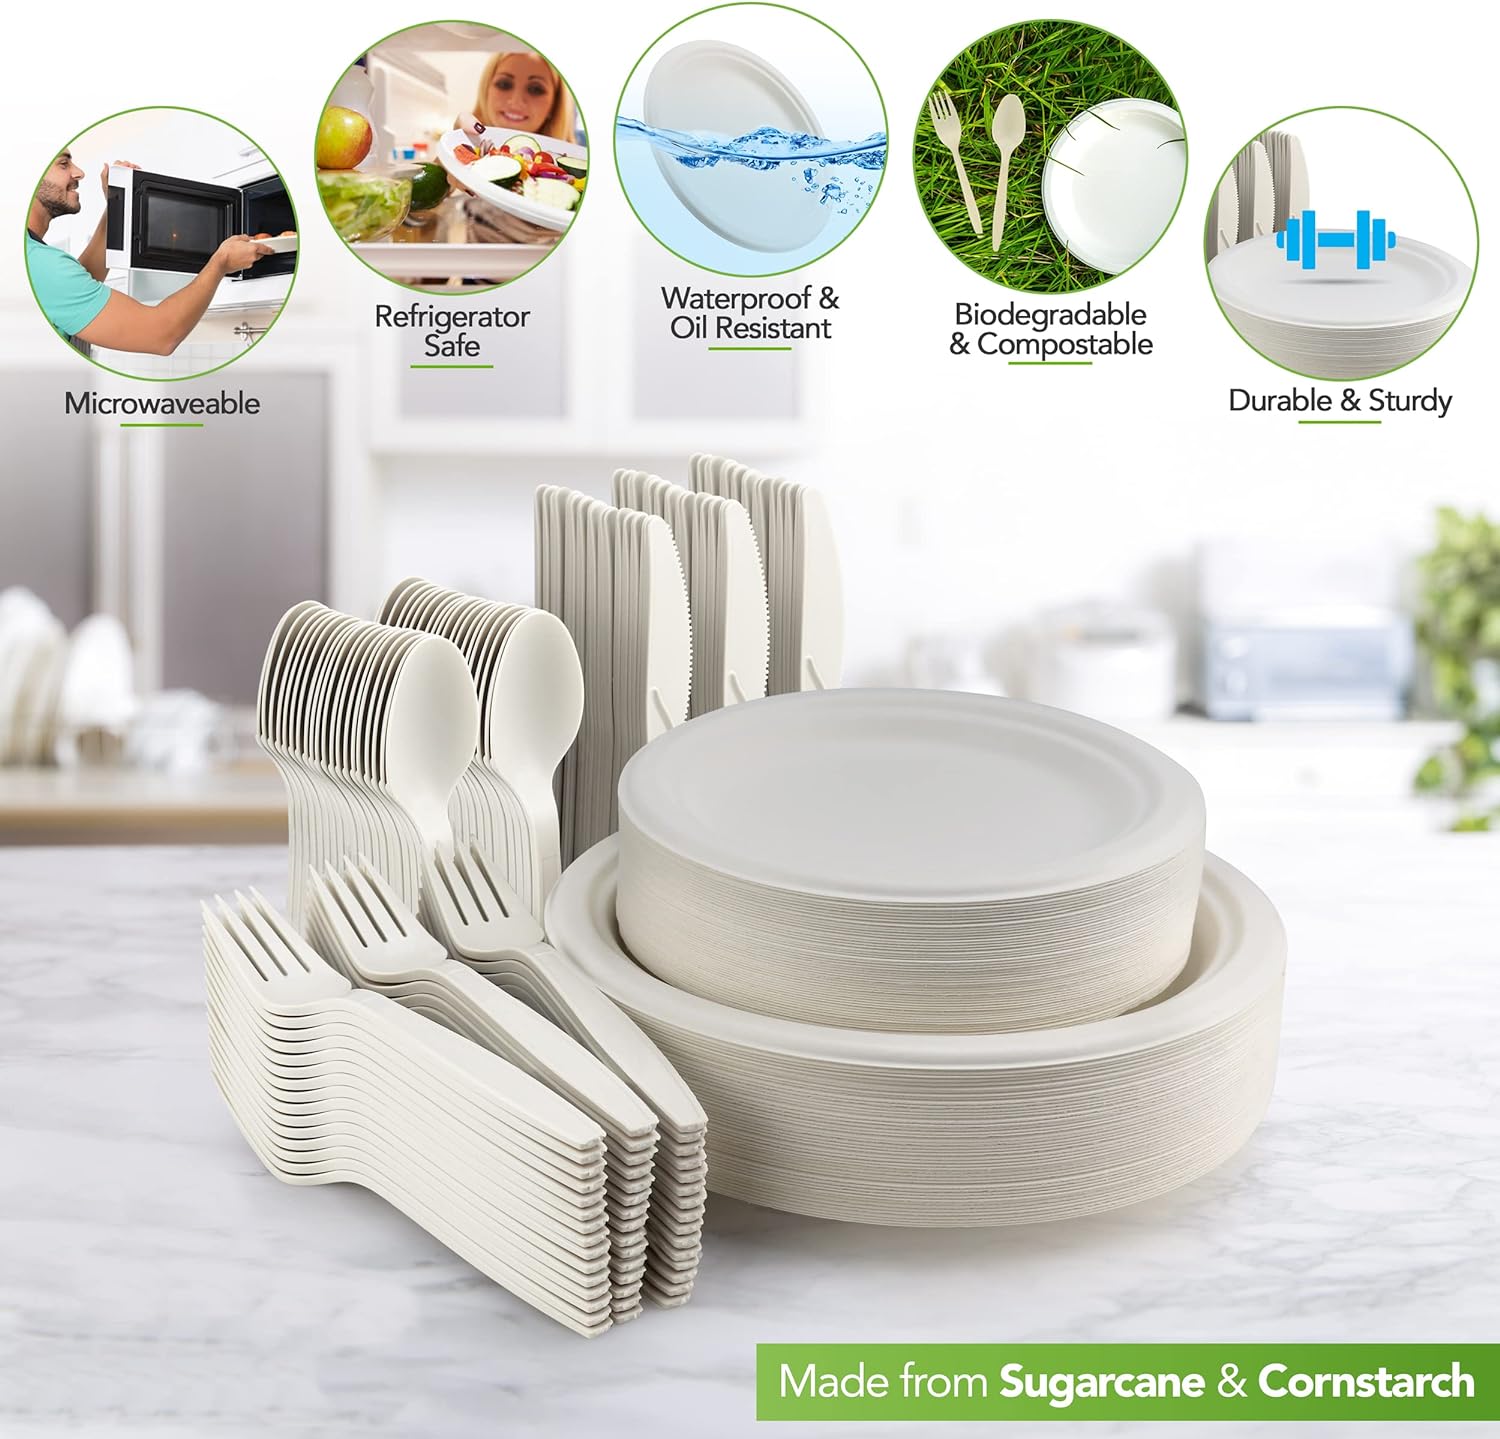 CURTA 350pcs Compostable Paper Plates Set Eco-friendly Heavy-duty  Disposable Paper Plates Cutlery Includes Biodegradable Plates, Bowls,Forks,  Knives